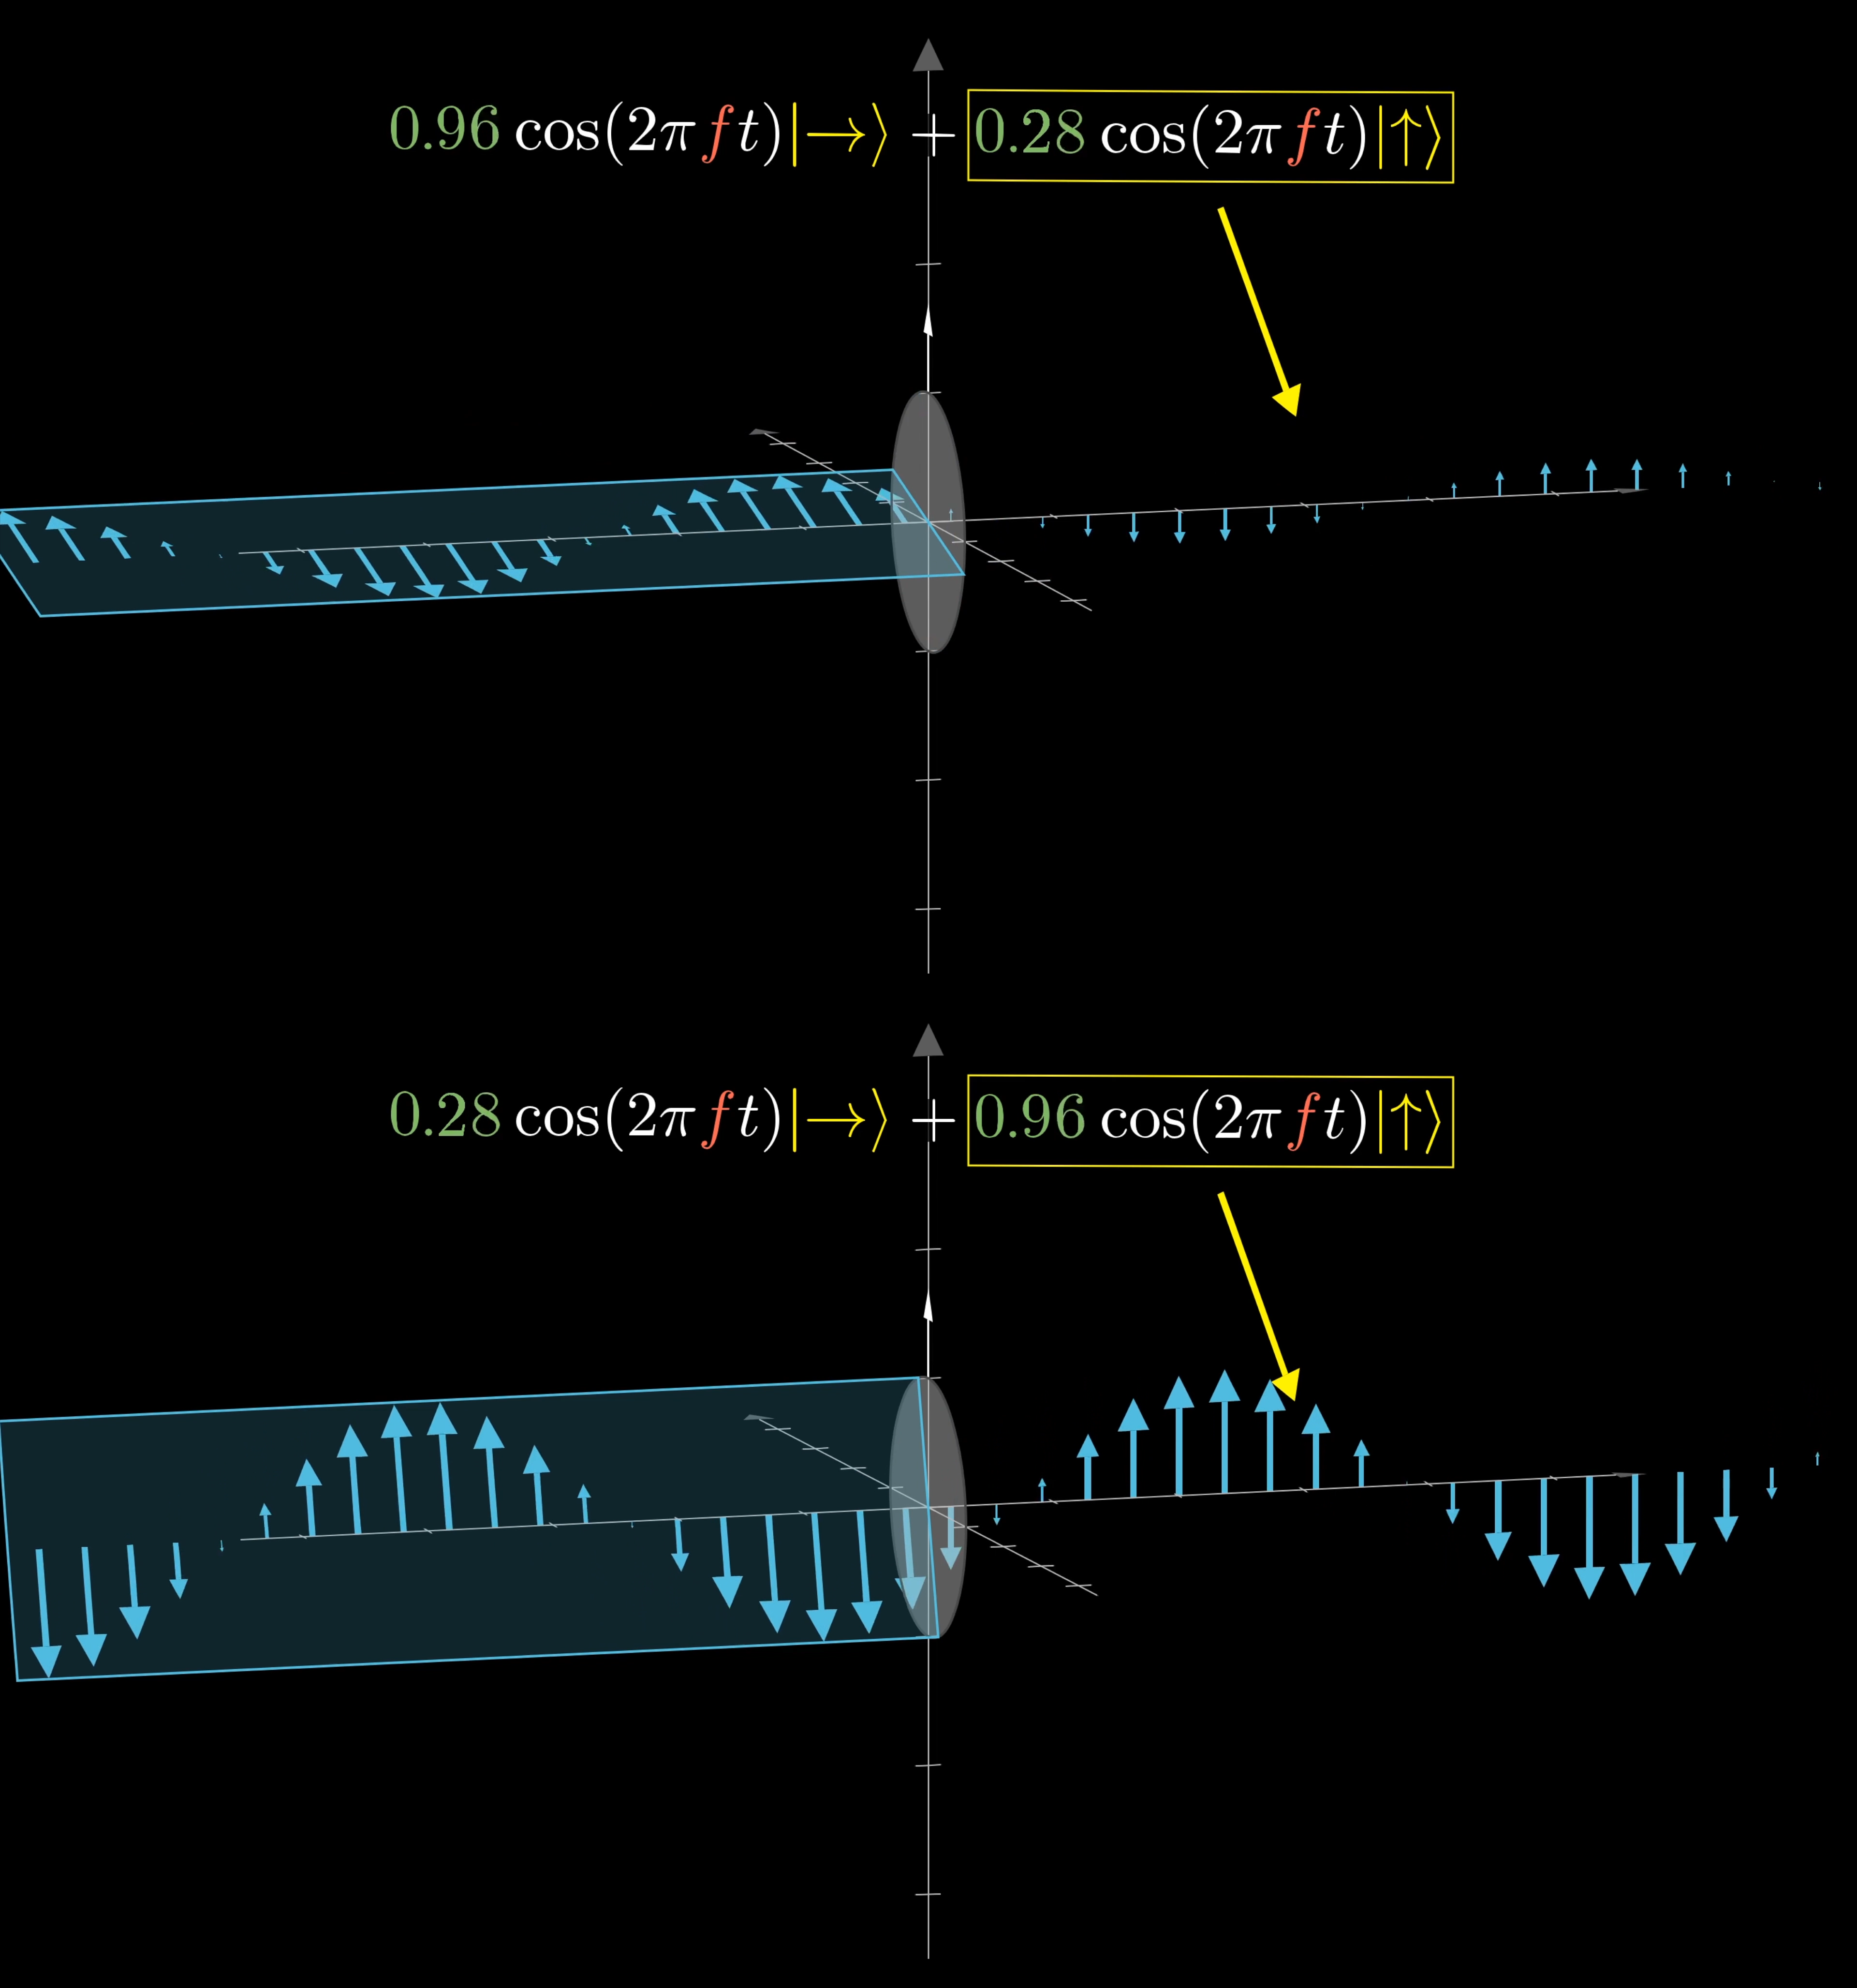 This polarizer only lets through the vertical component of the wave. In the first example, the horizontal component is much larger, so the resulting wave is small. In the second example, the wave is nearly vertical, so the resulting wave is almost as large.